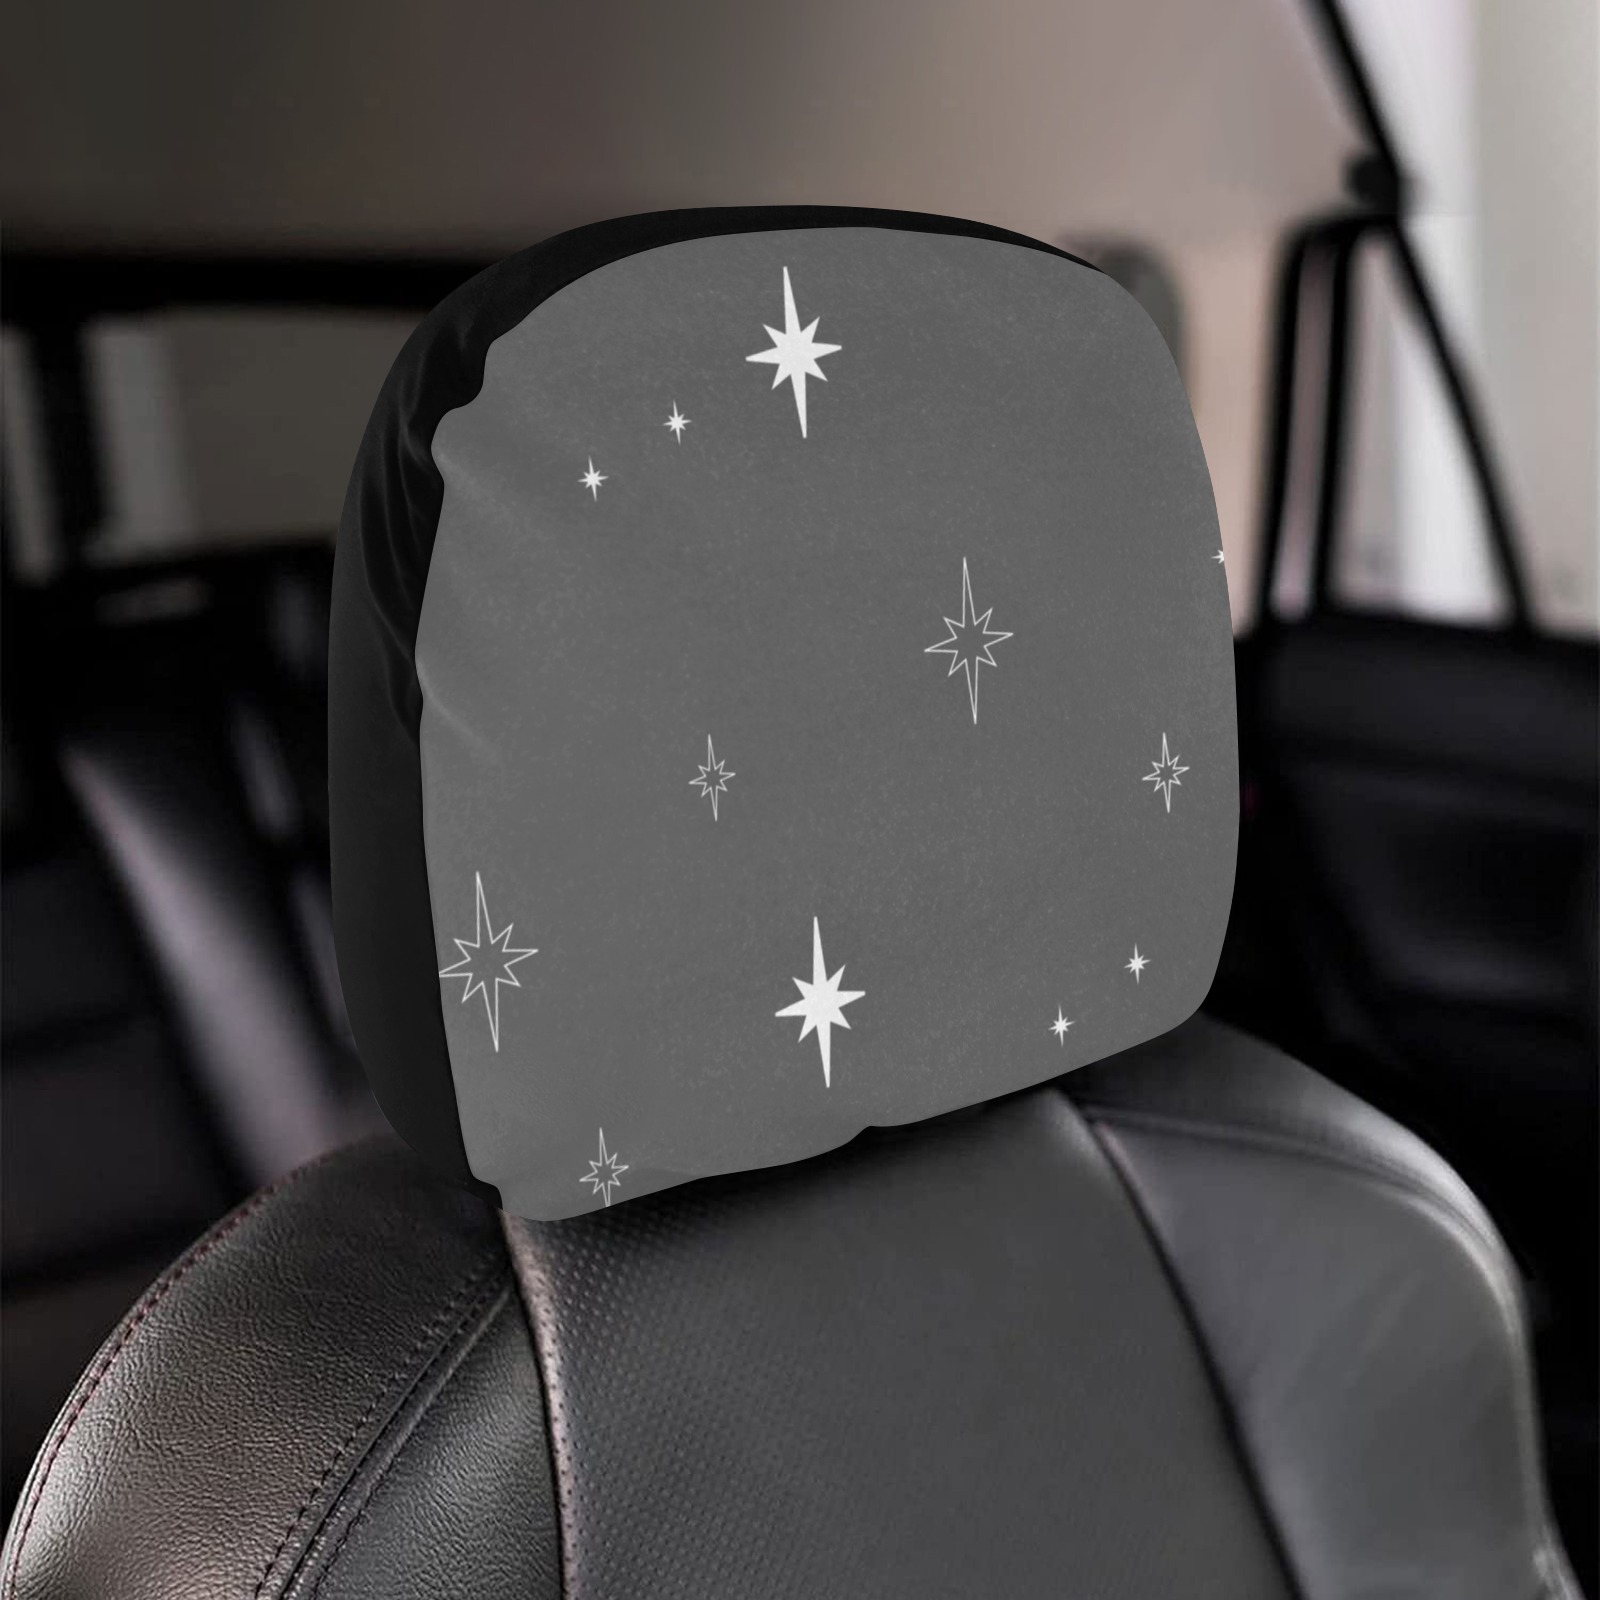 AIRBUS A350 Head SEAT cover style Car Headrest Cover (2pcs)